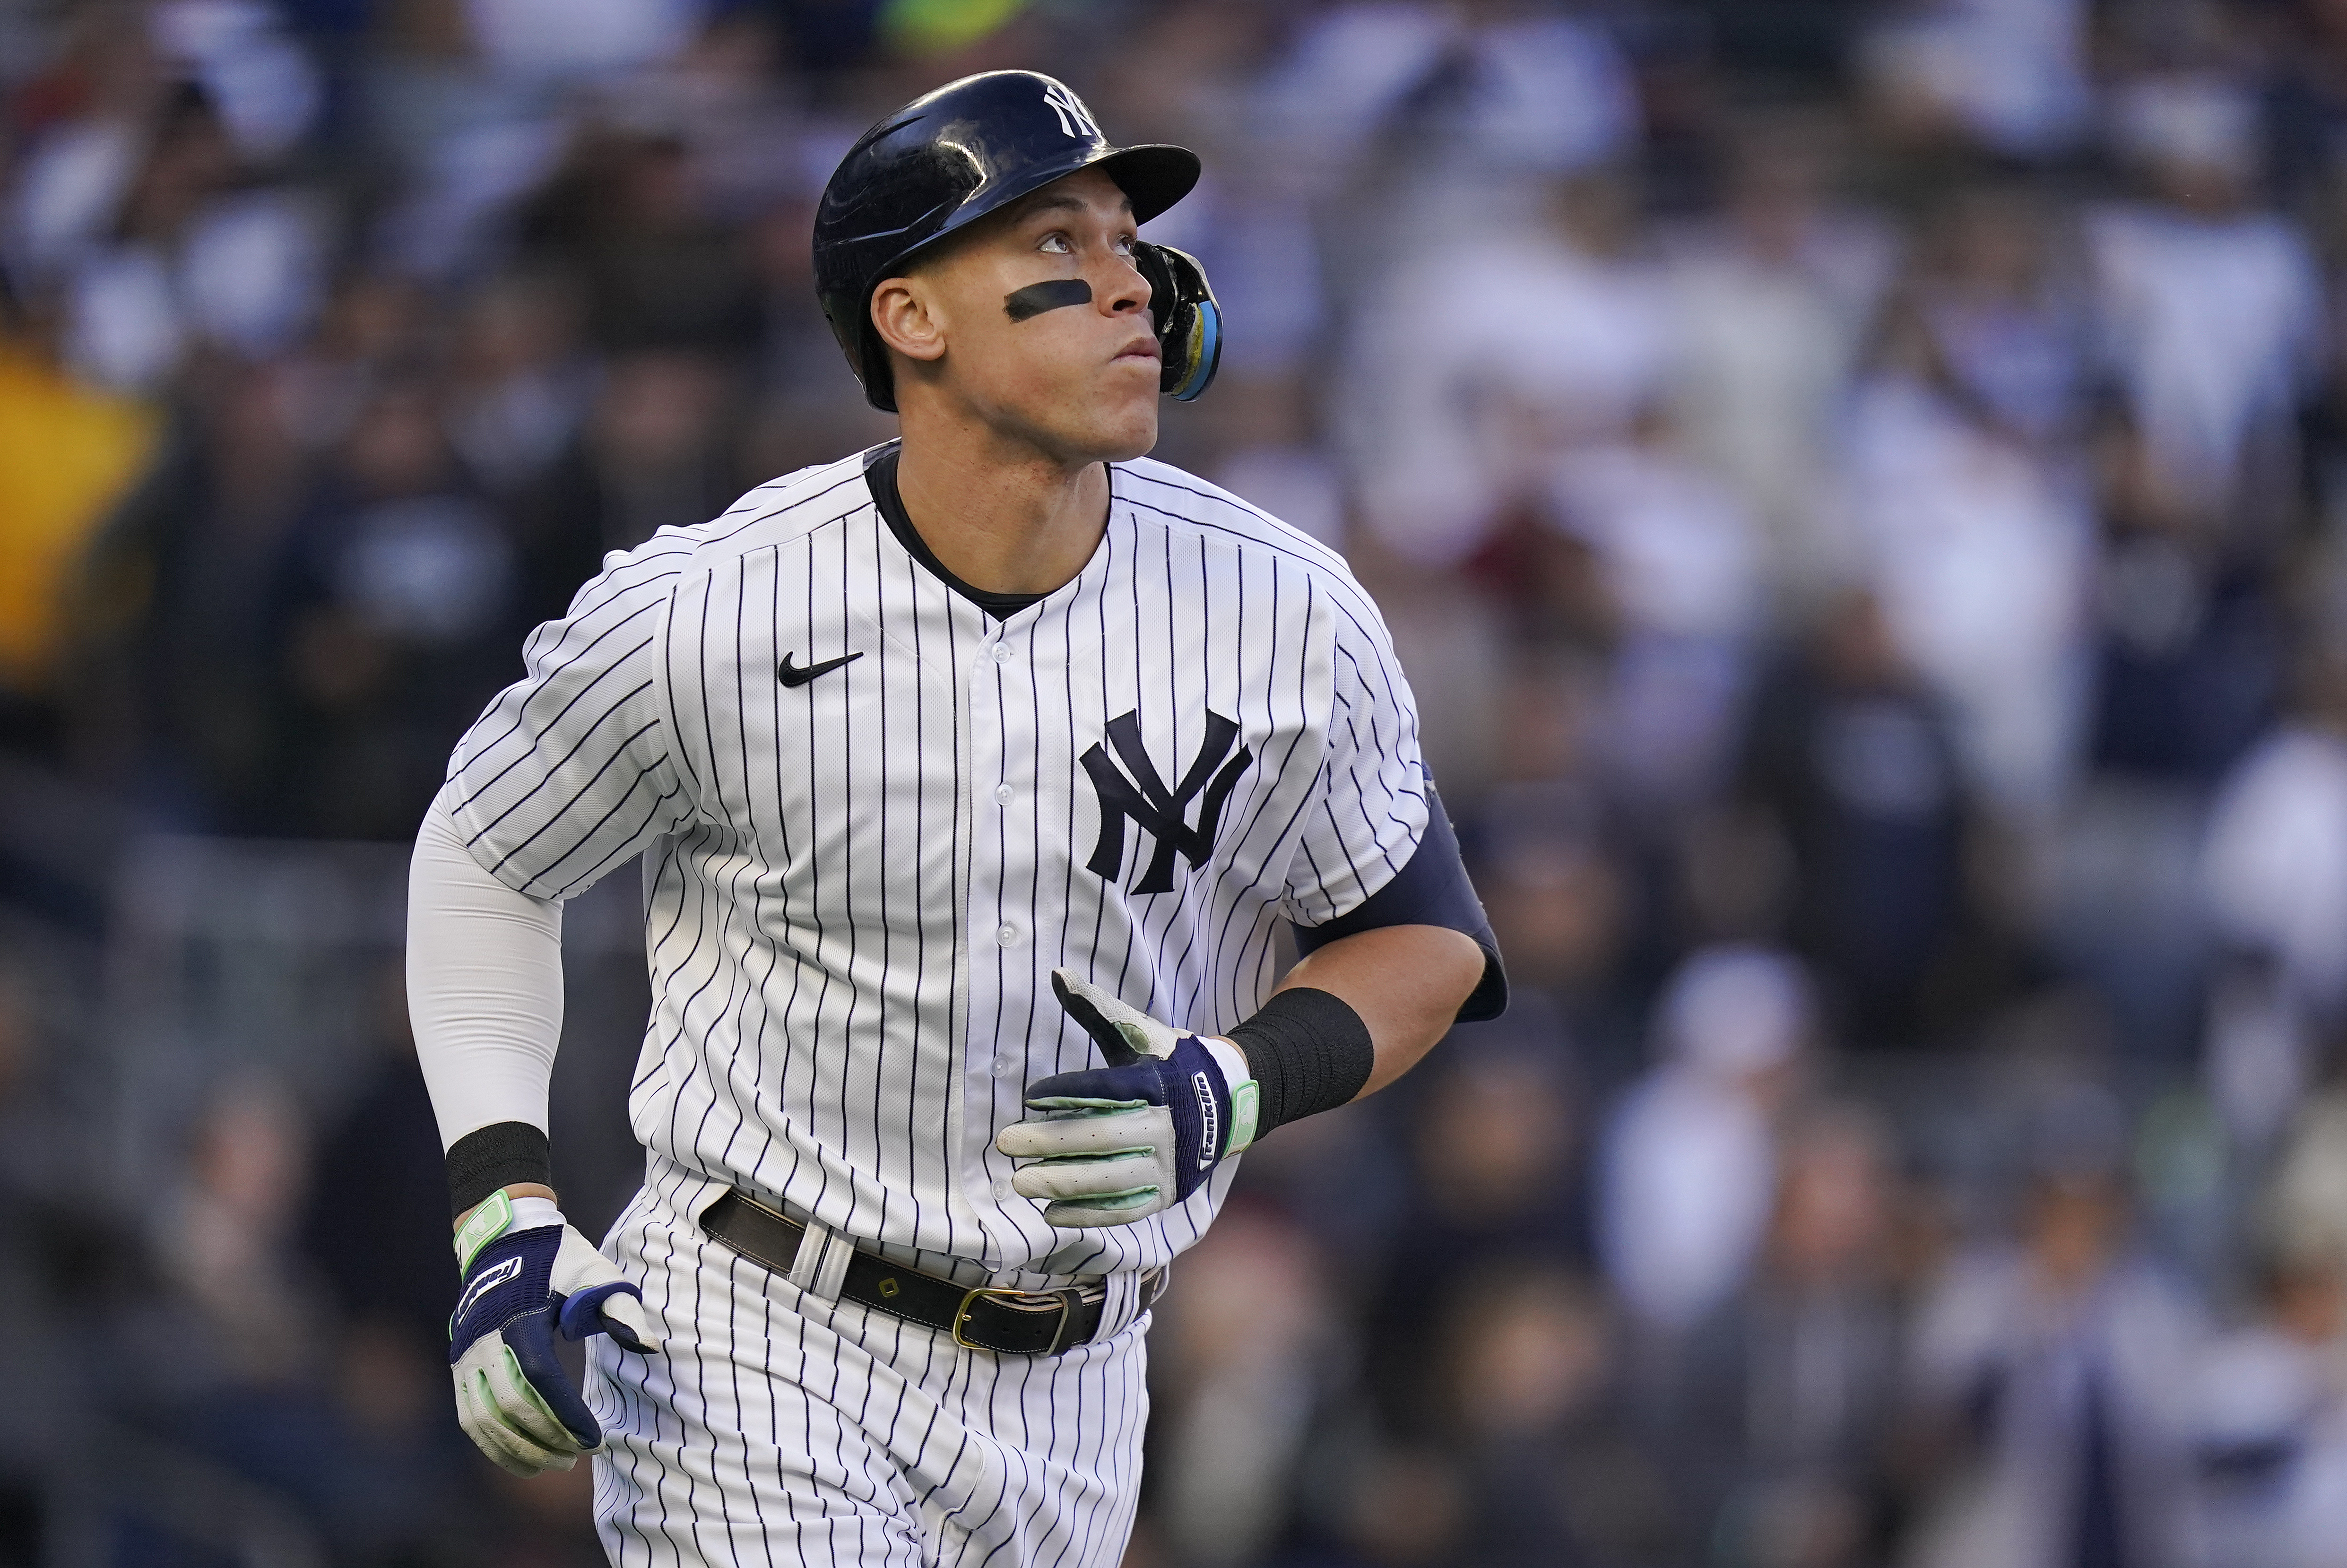 Aaron Judge is set to return to the Bronx